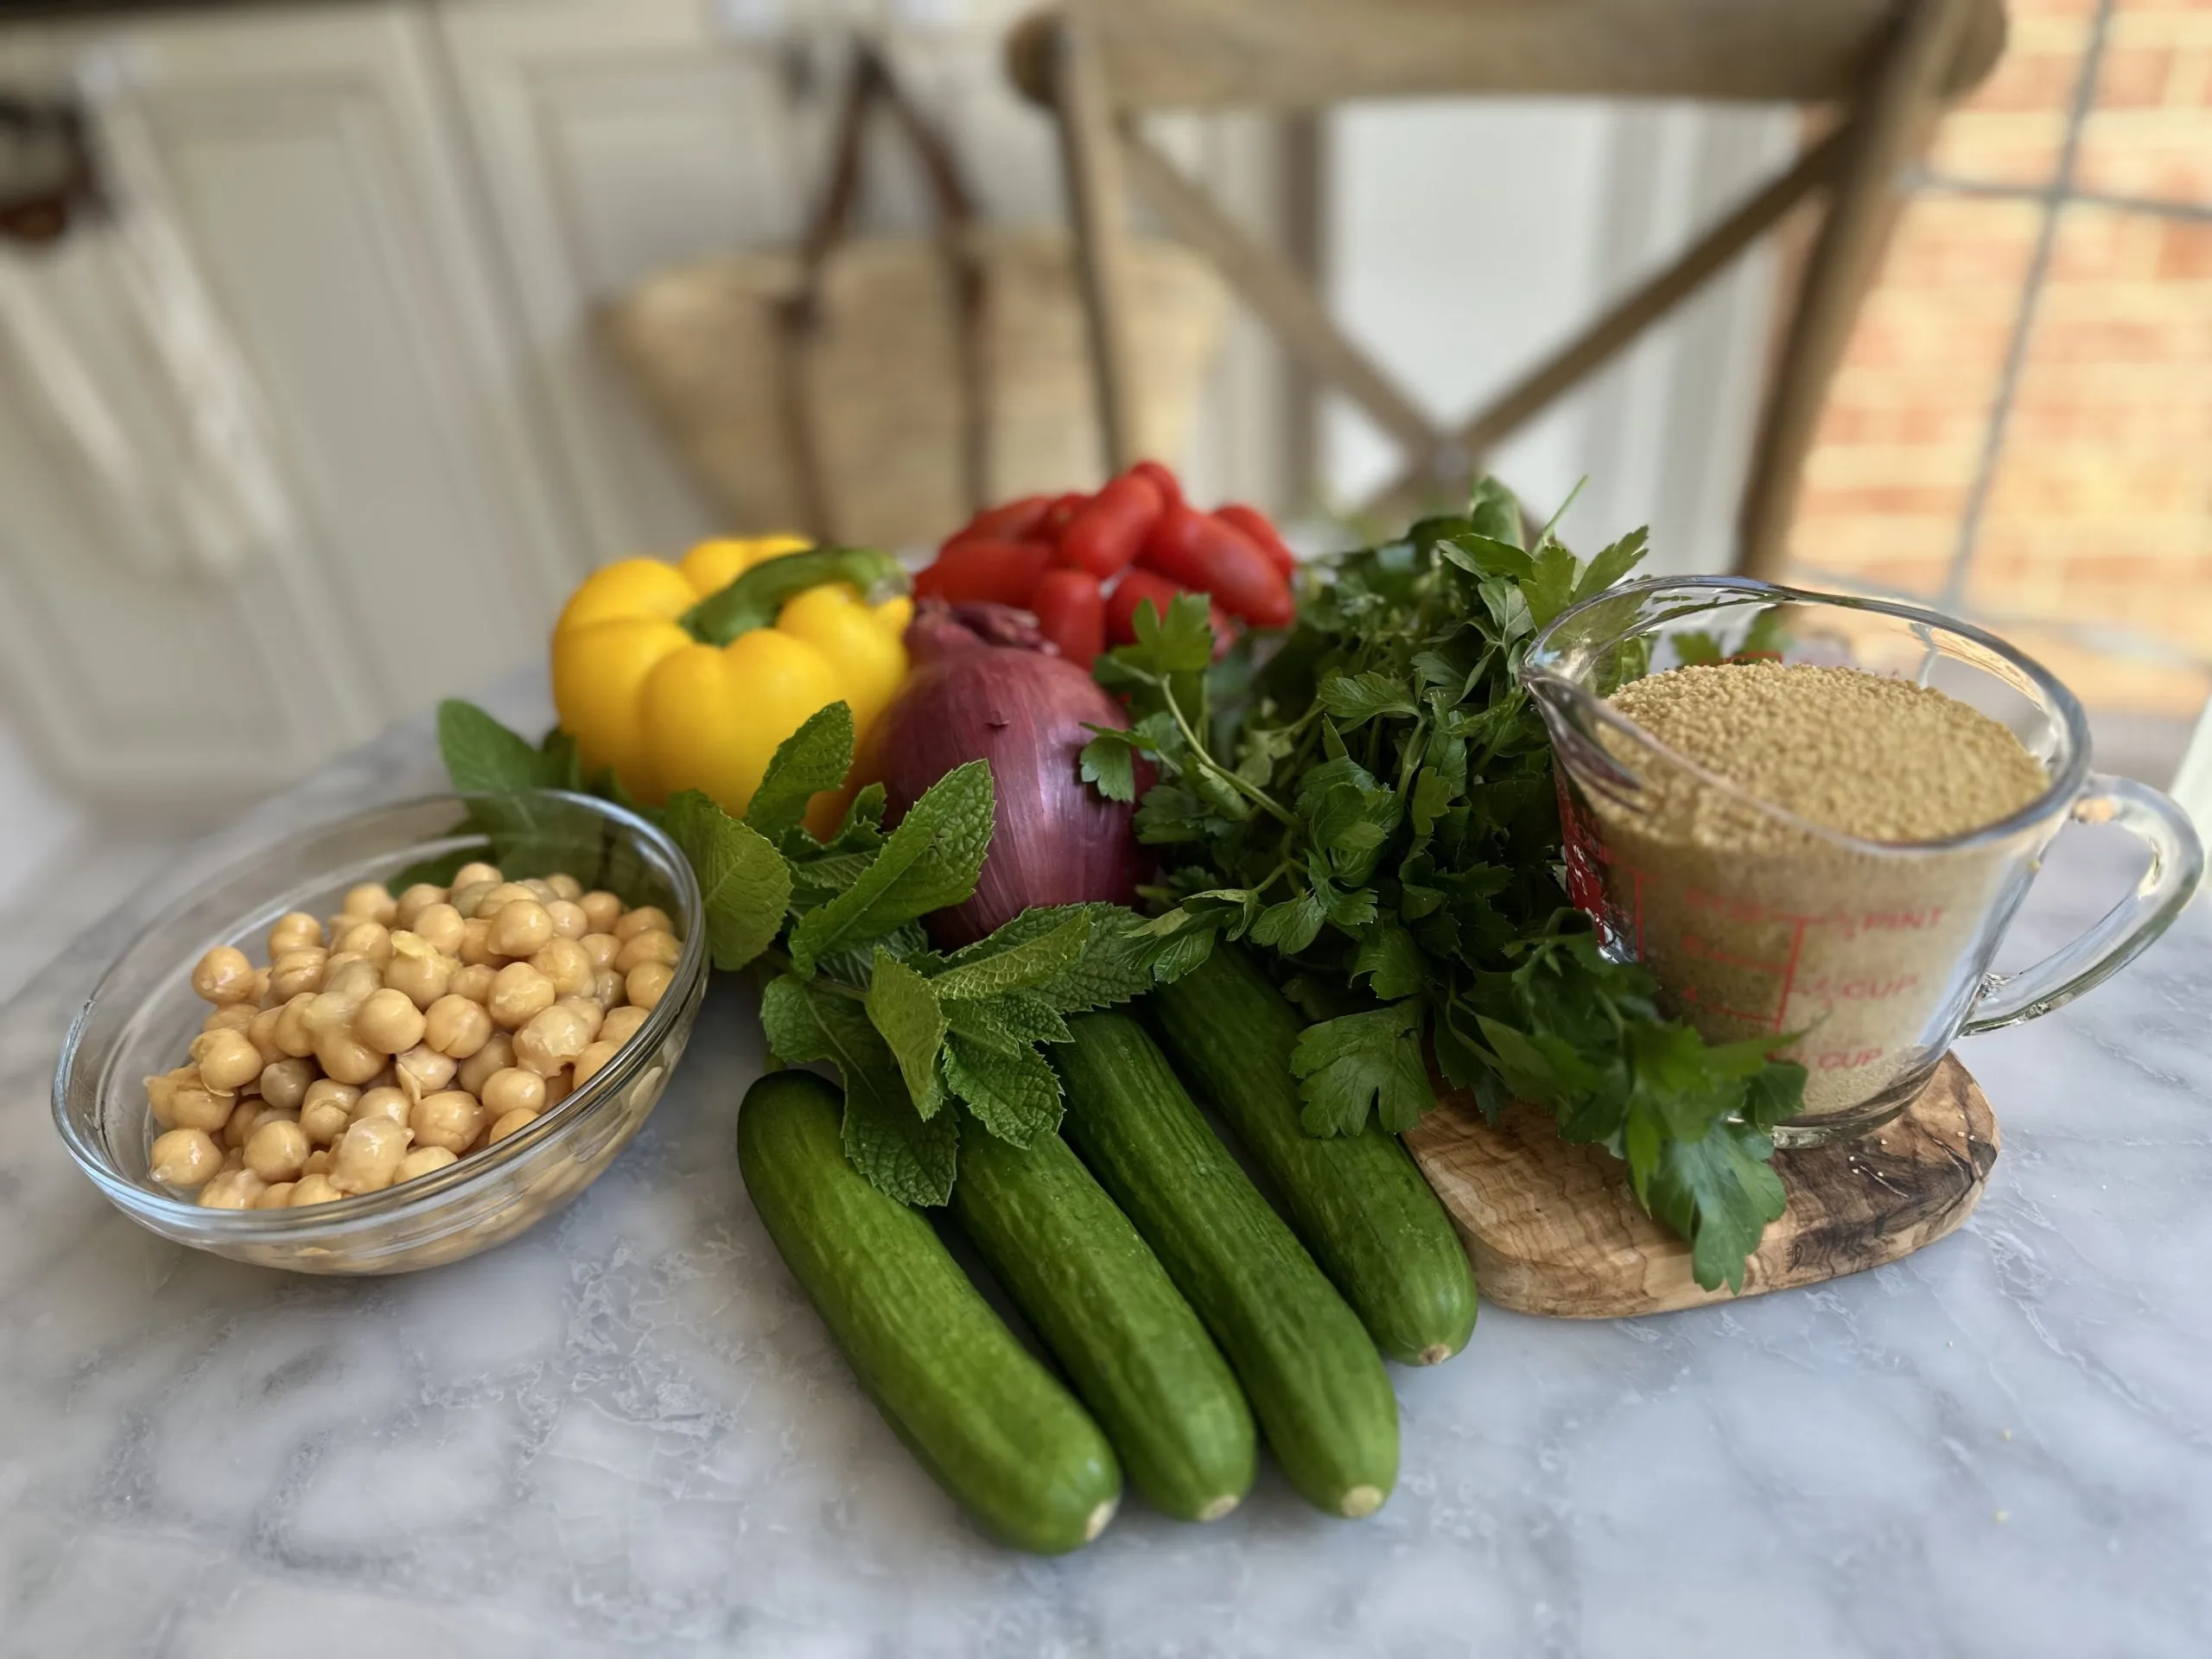 ingredients for taboule salad